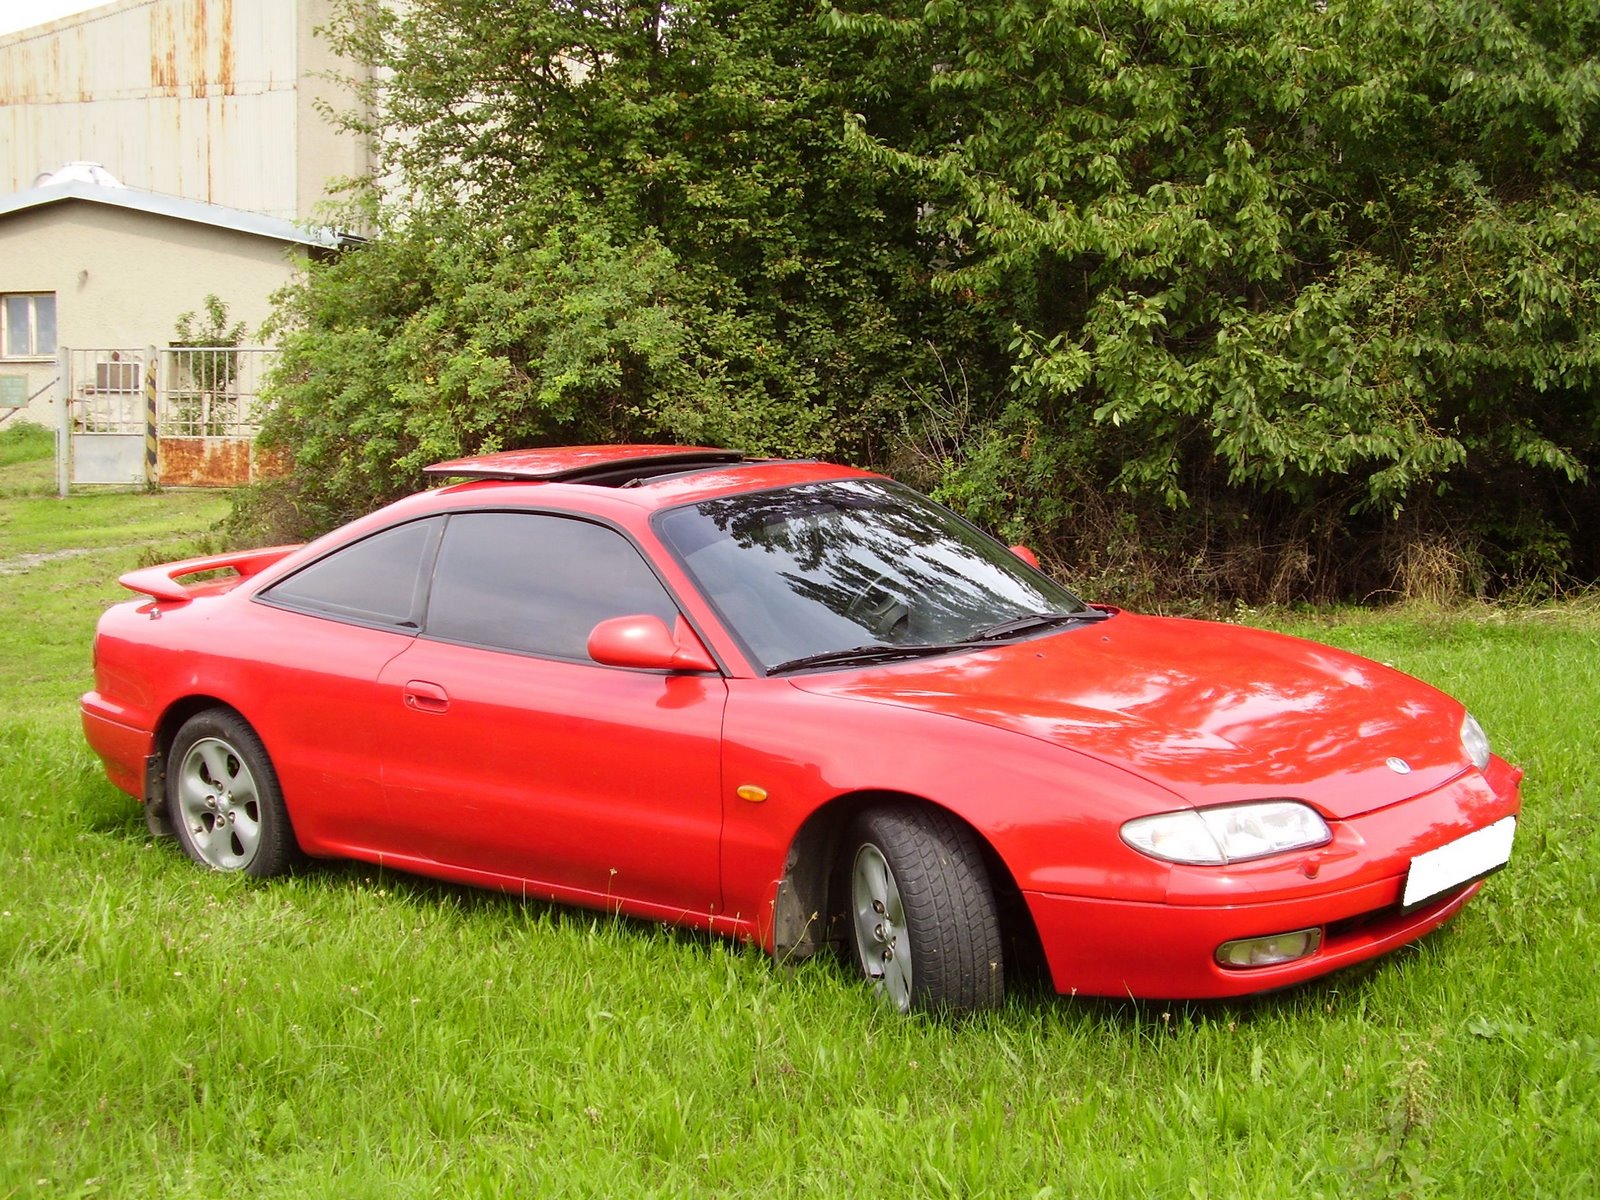 1997 Mazda MX-6 picture · 18 pictures · 1 video · 7 reviews